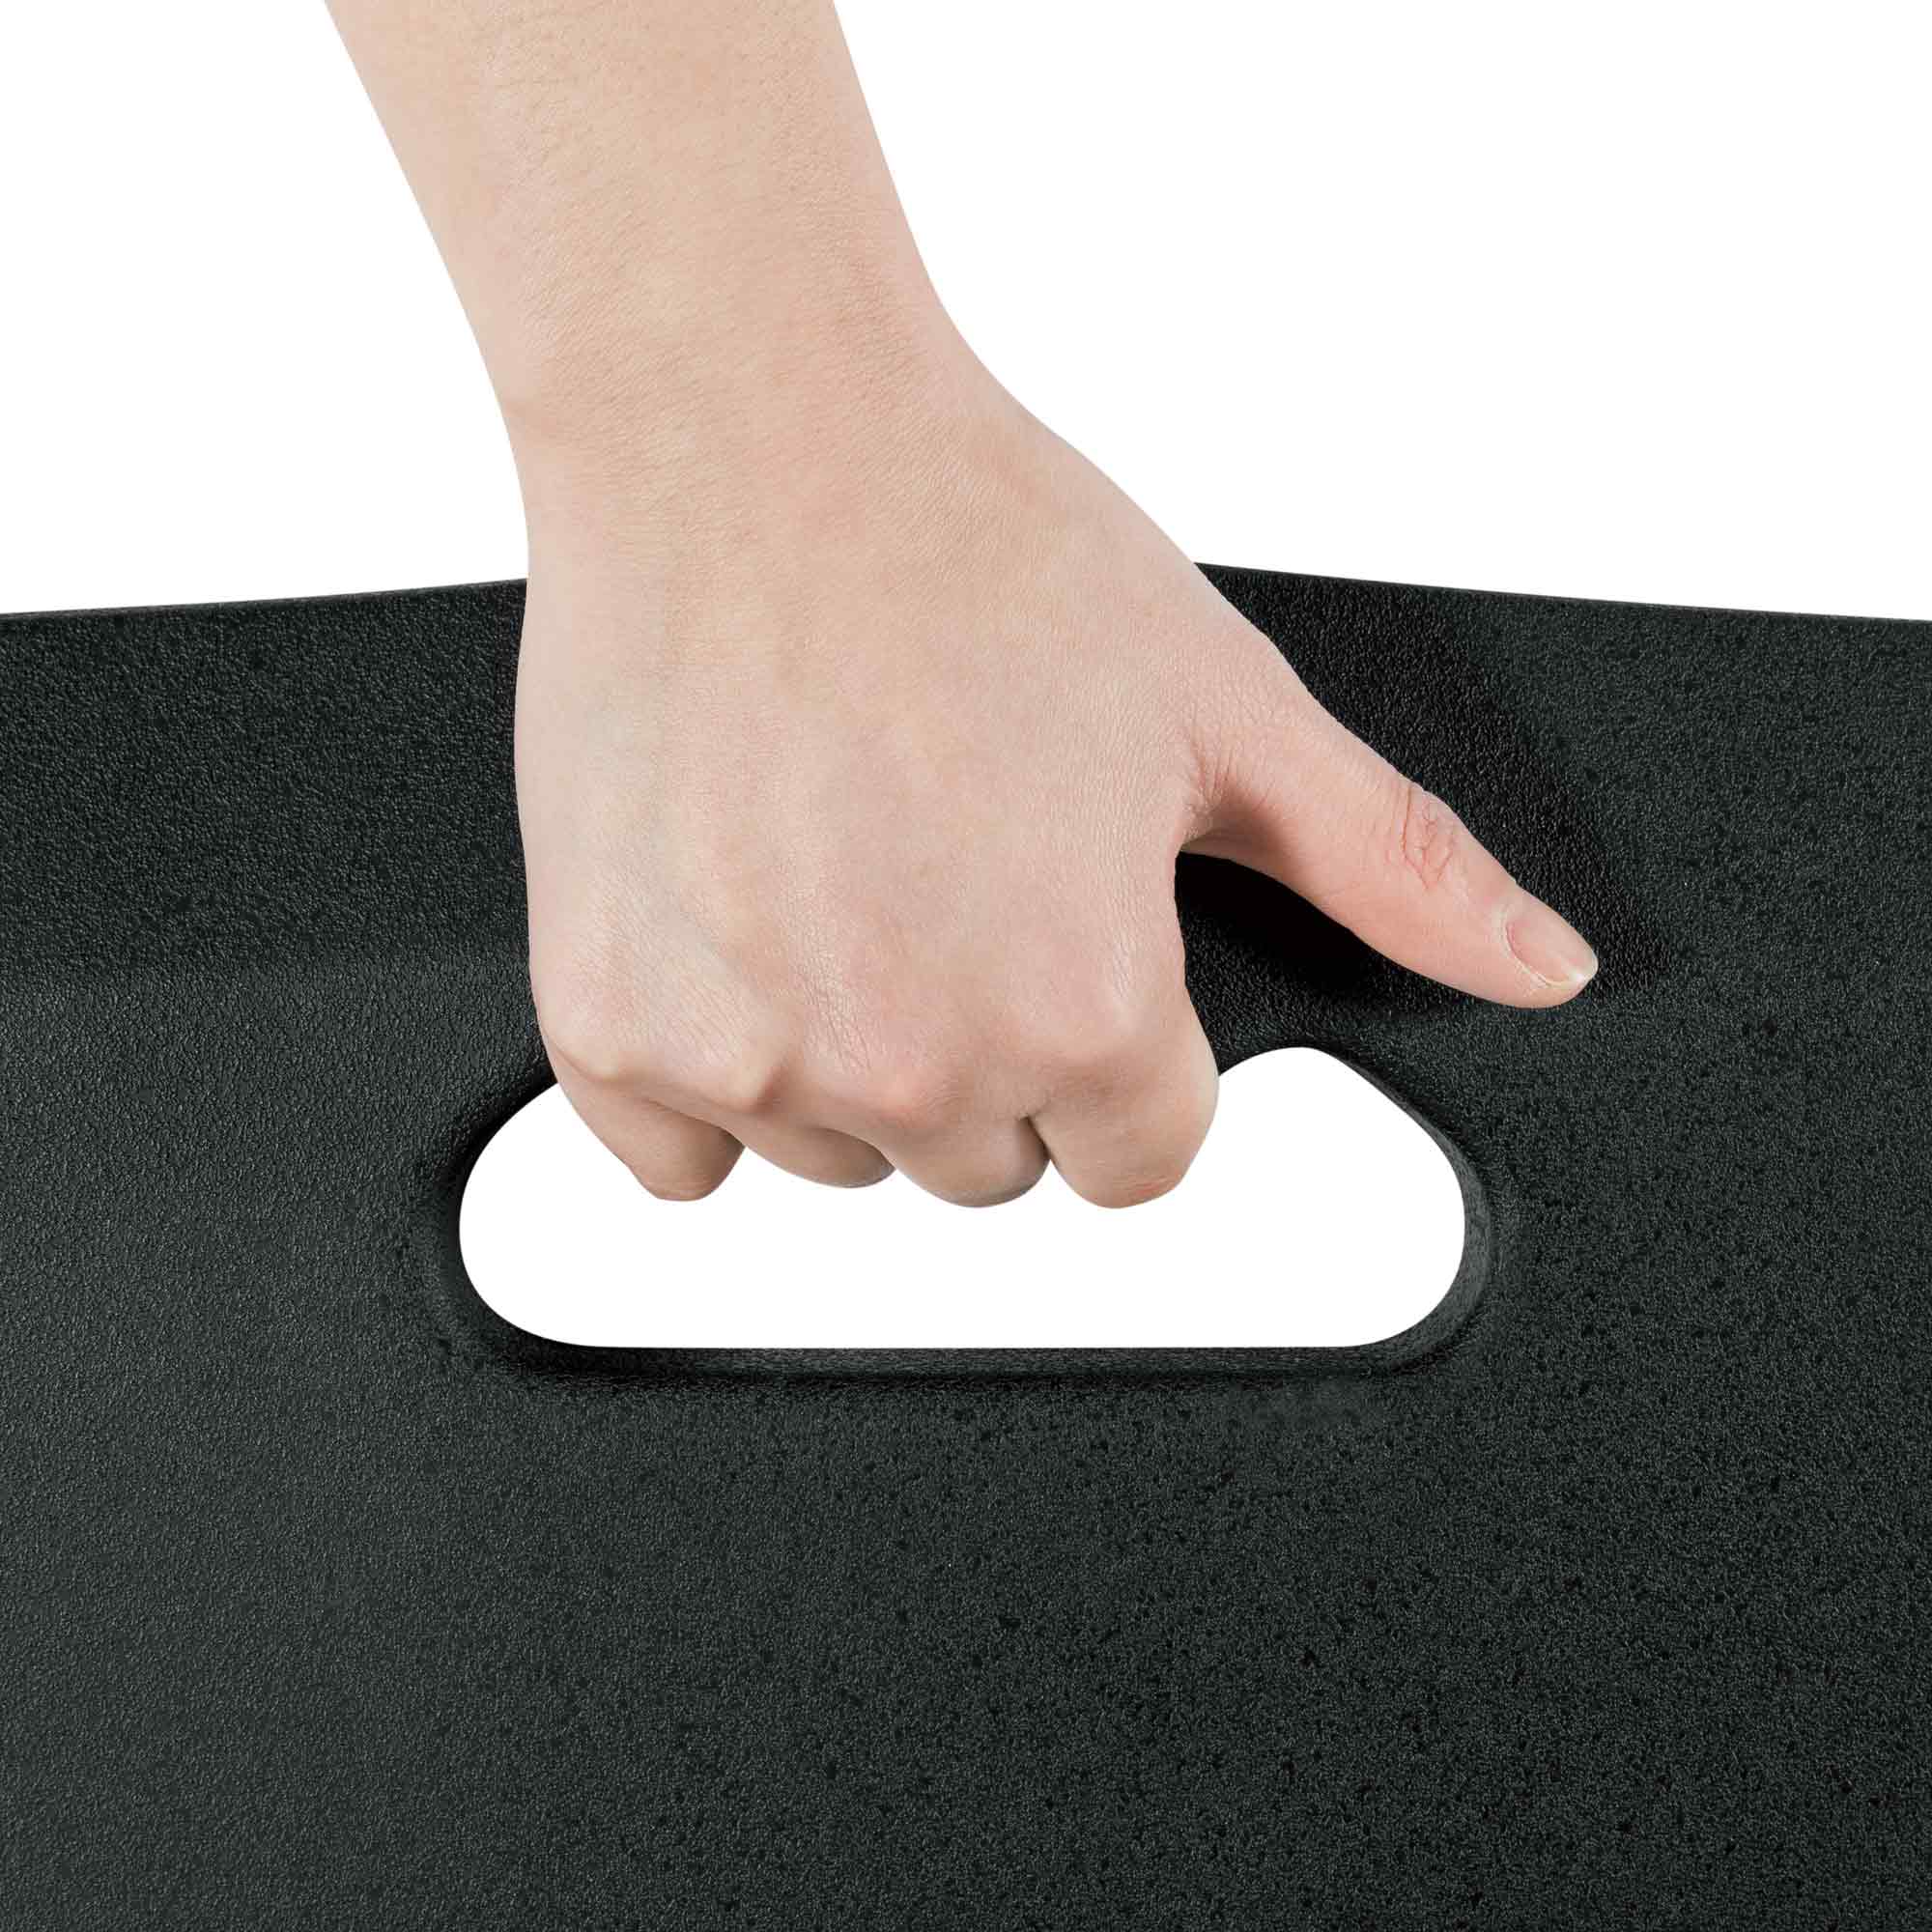 https://cdn.shopify.com/s/files/1/0537/2729/products/Anti-Fatigue-Standing-Mat-with-Handle-36-Inch-Size-Stand-Steady-MTH36BL-Black-4_4aa0cf82-e93e-4af8-81d6-8c07a4b59553.jpg?v=1629745834